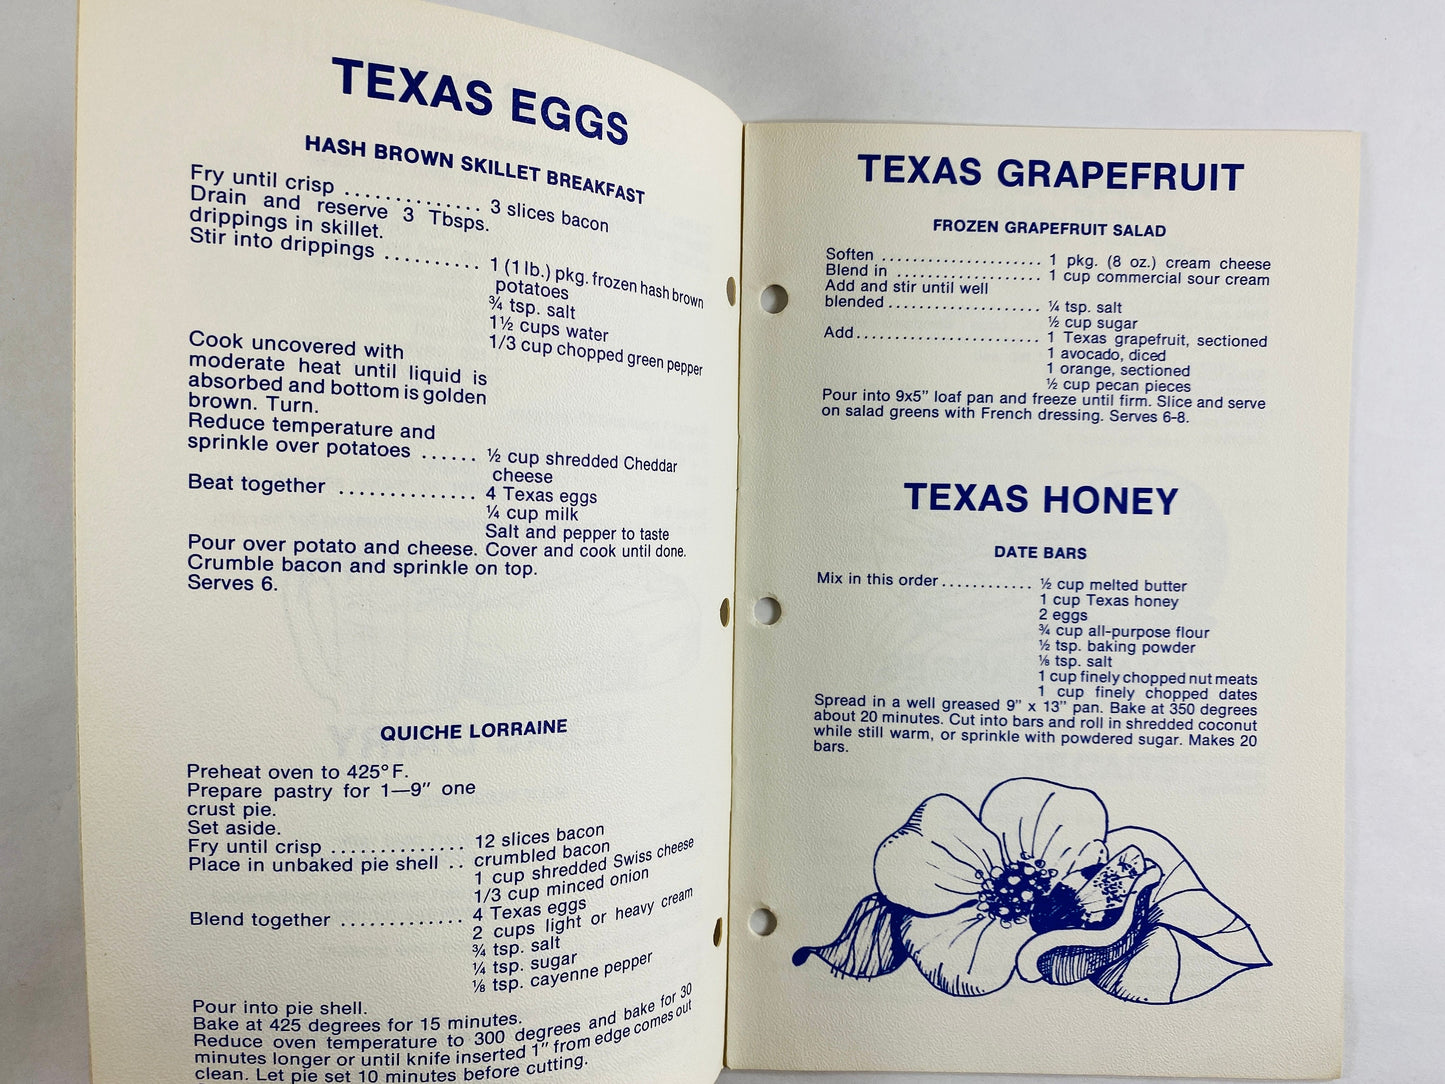 Texas Recipes & Agricultural Products vintage cookbook booklet Chuck Wagon Chili, Milk Punches, Date Bars, Pecan Cheese Ball, Spareribs